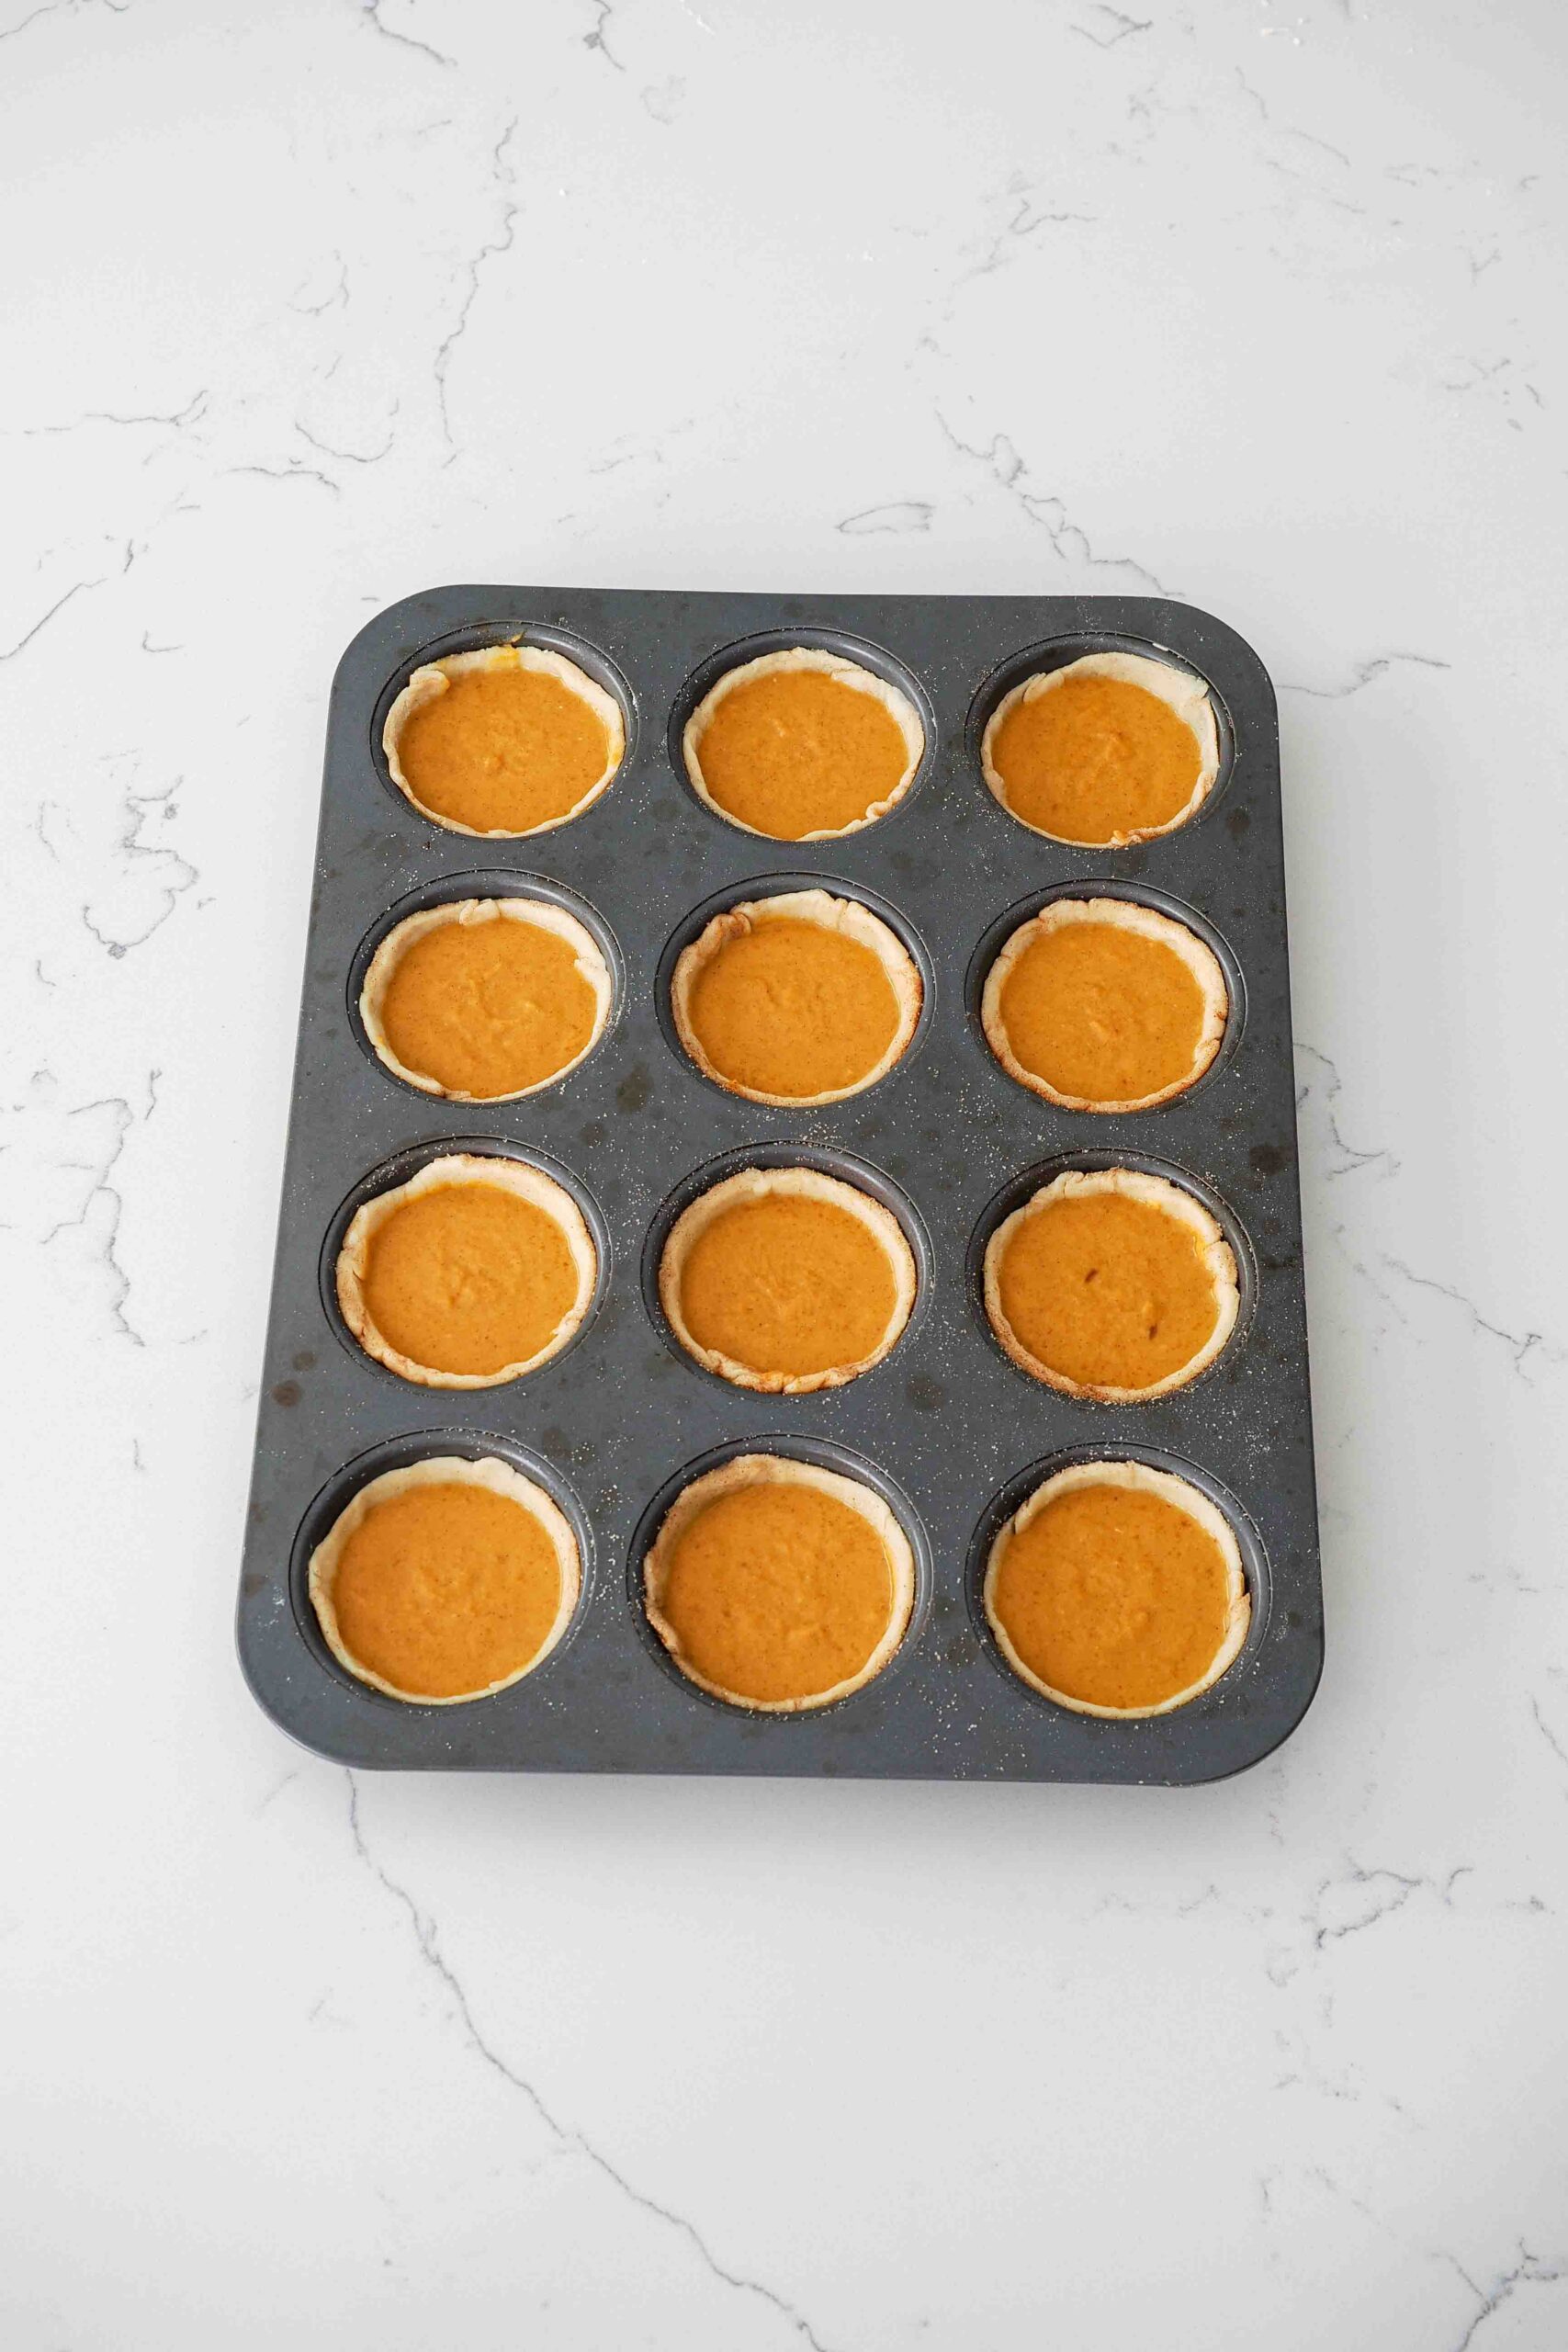 Unbaked mini pumpkin pies in a muffin pan.